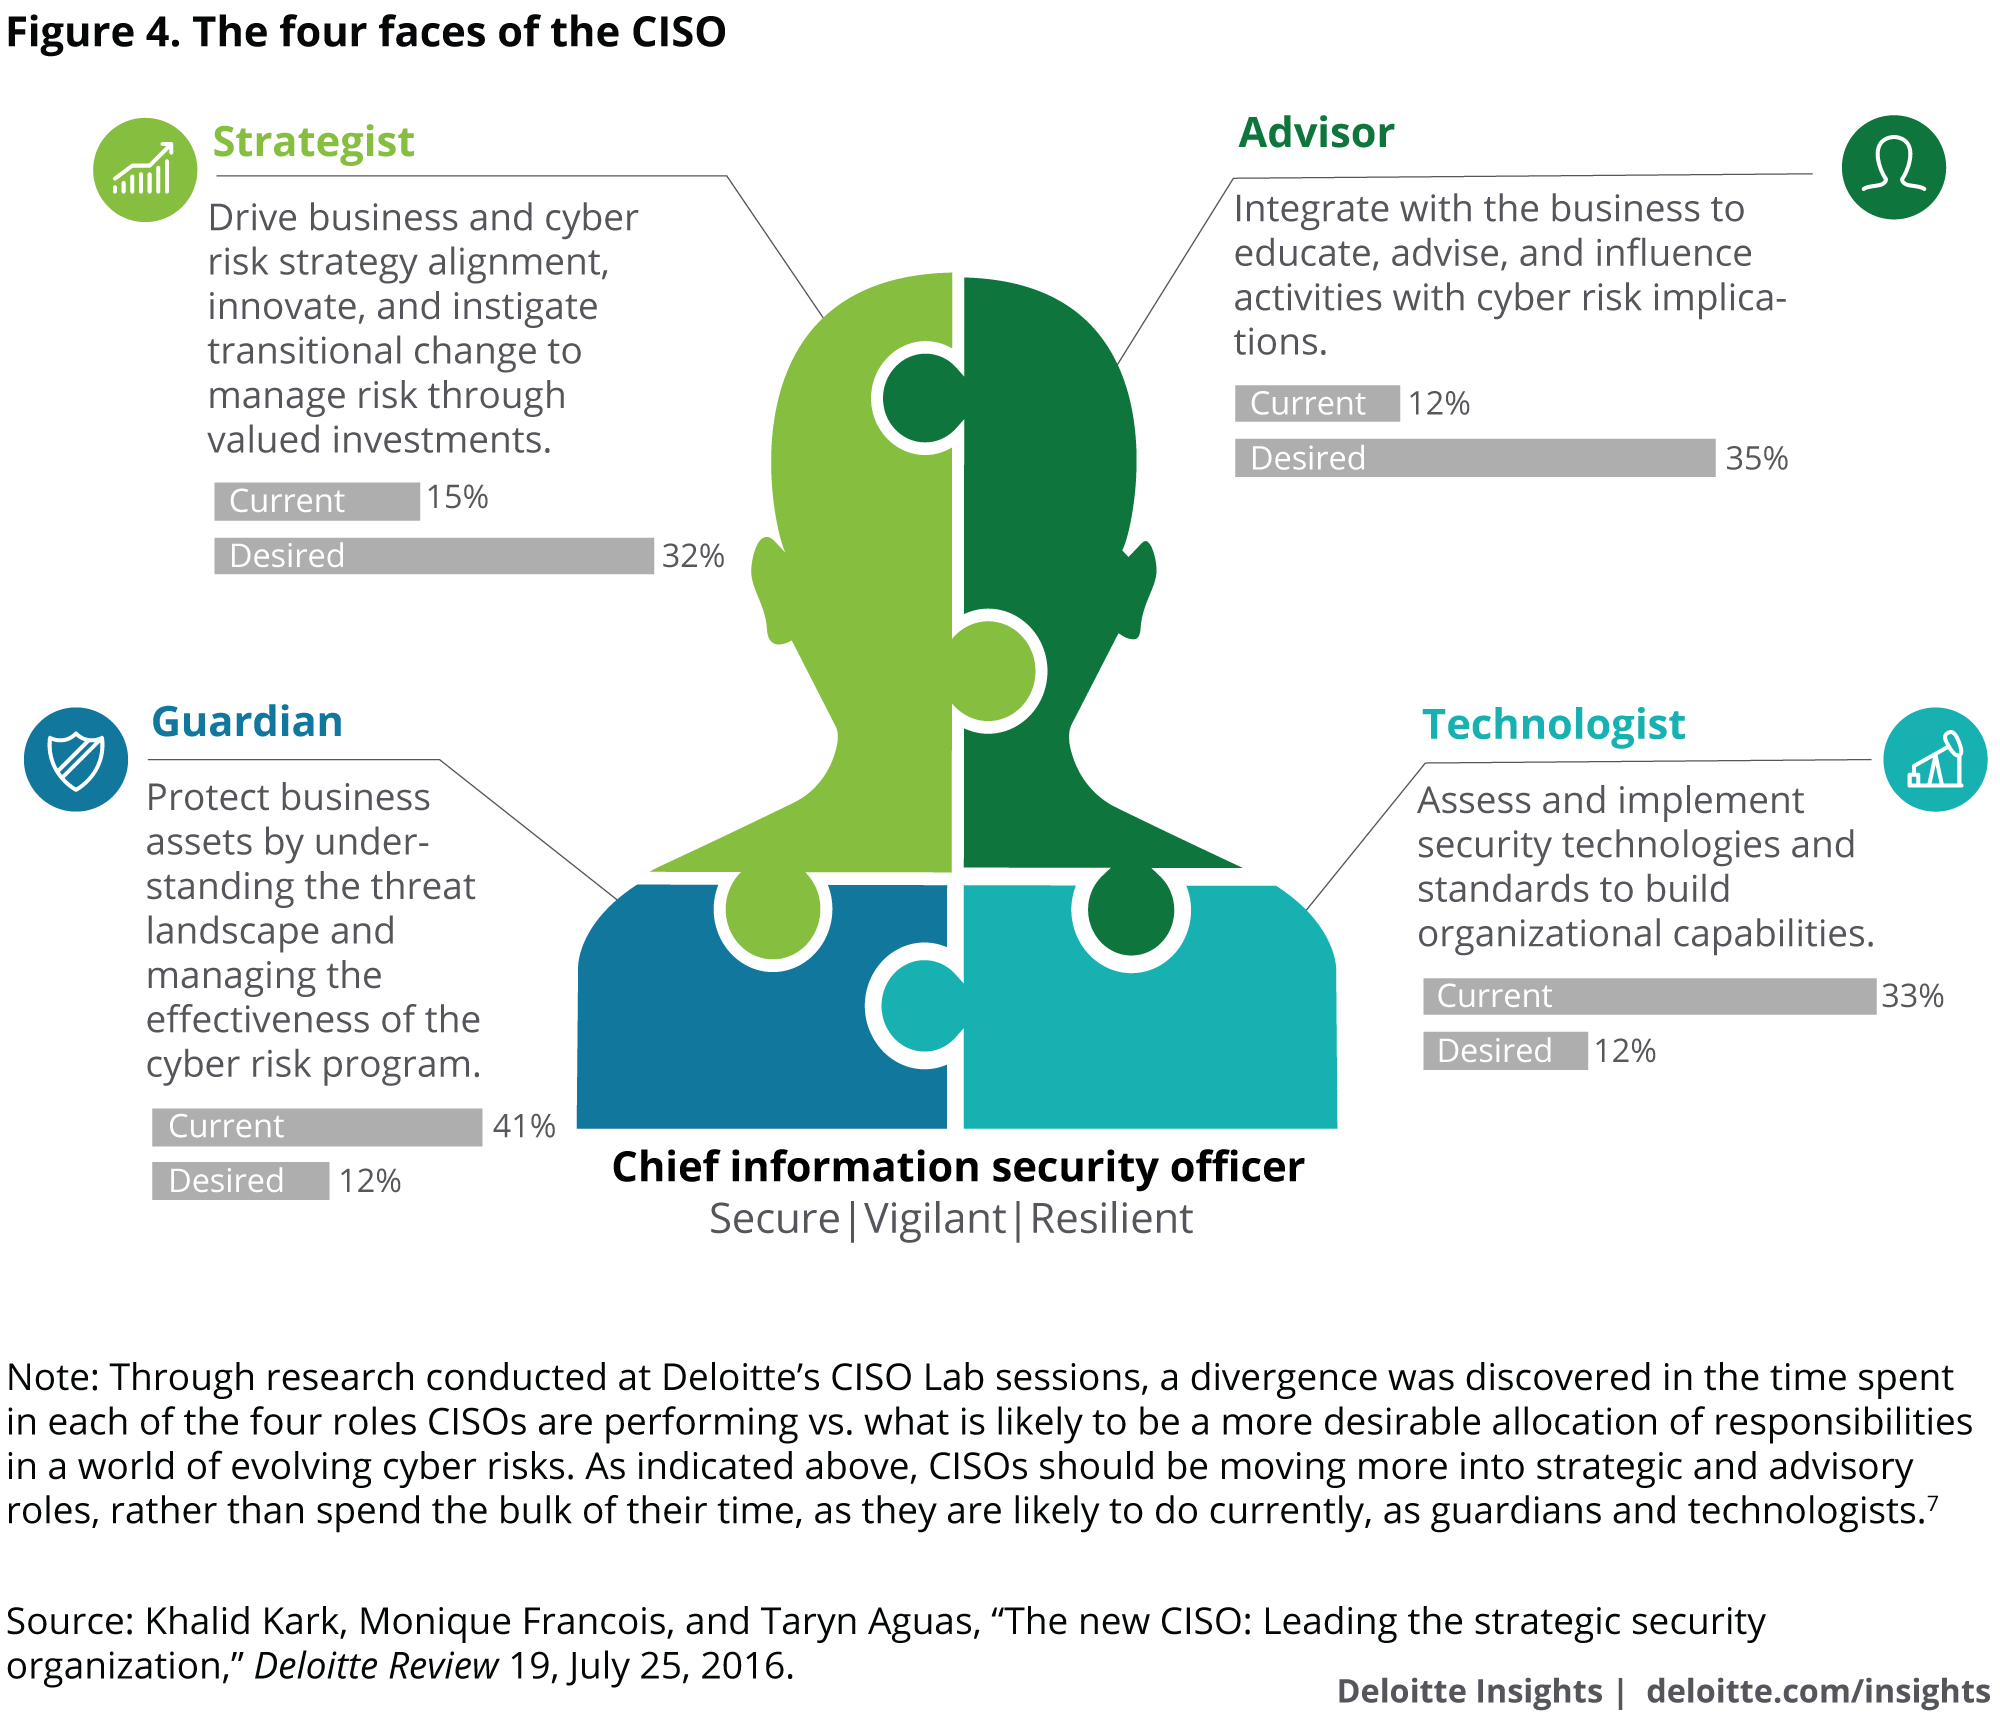 The four faces of the CISO